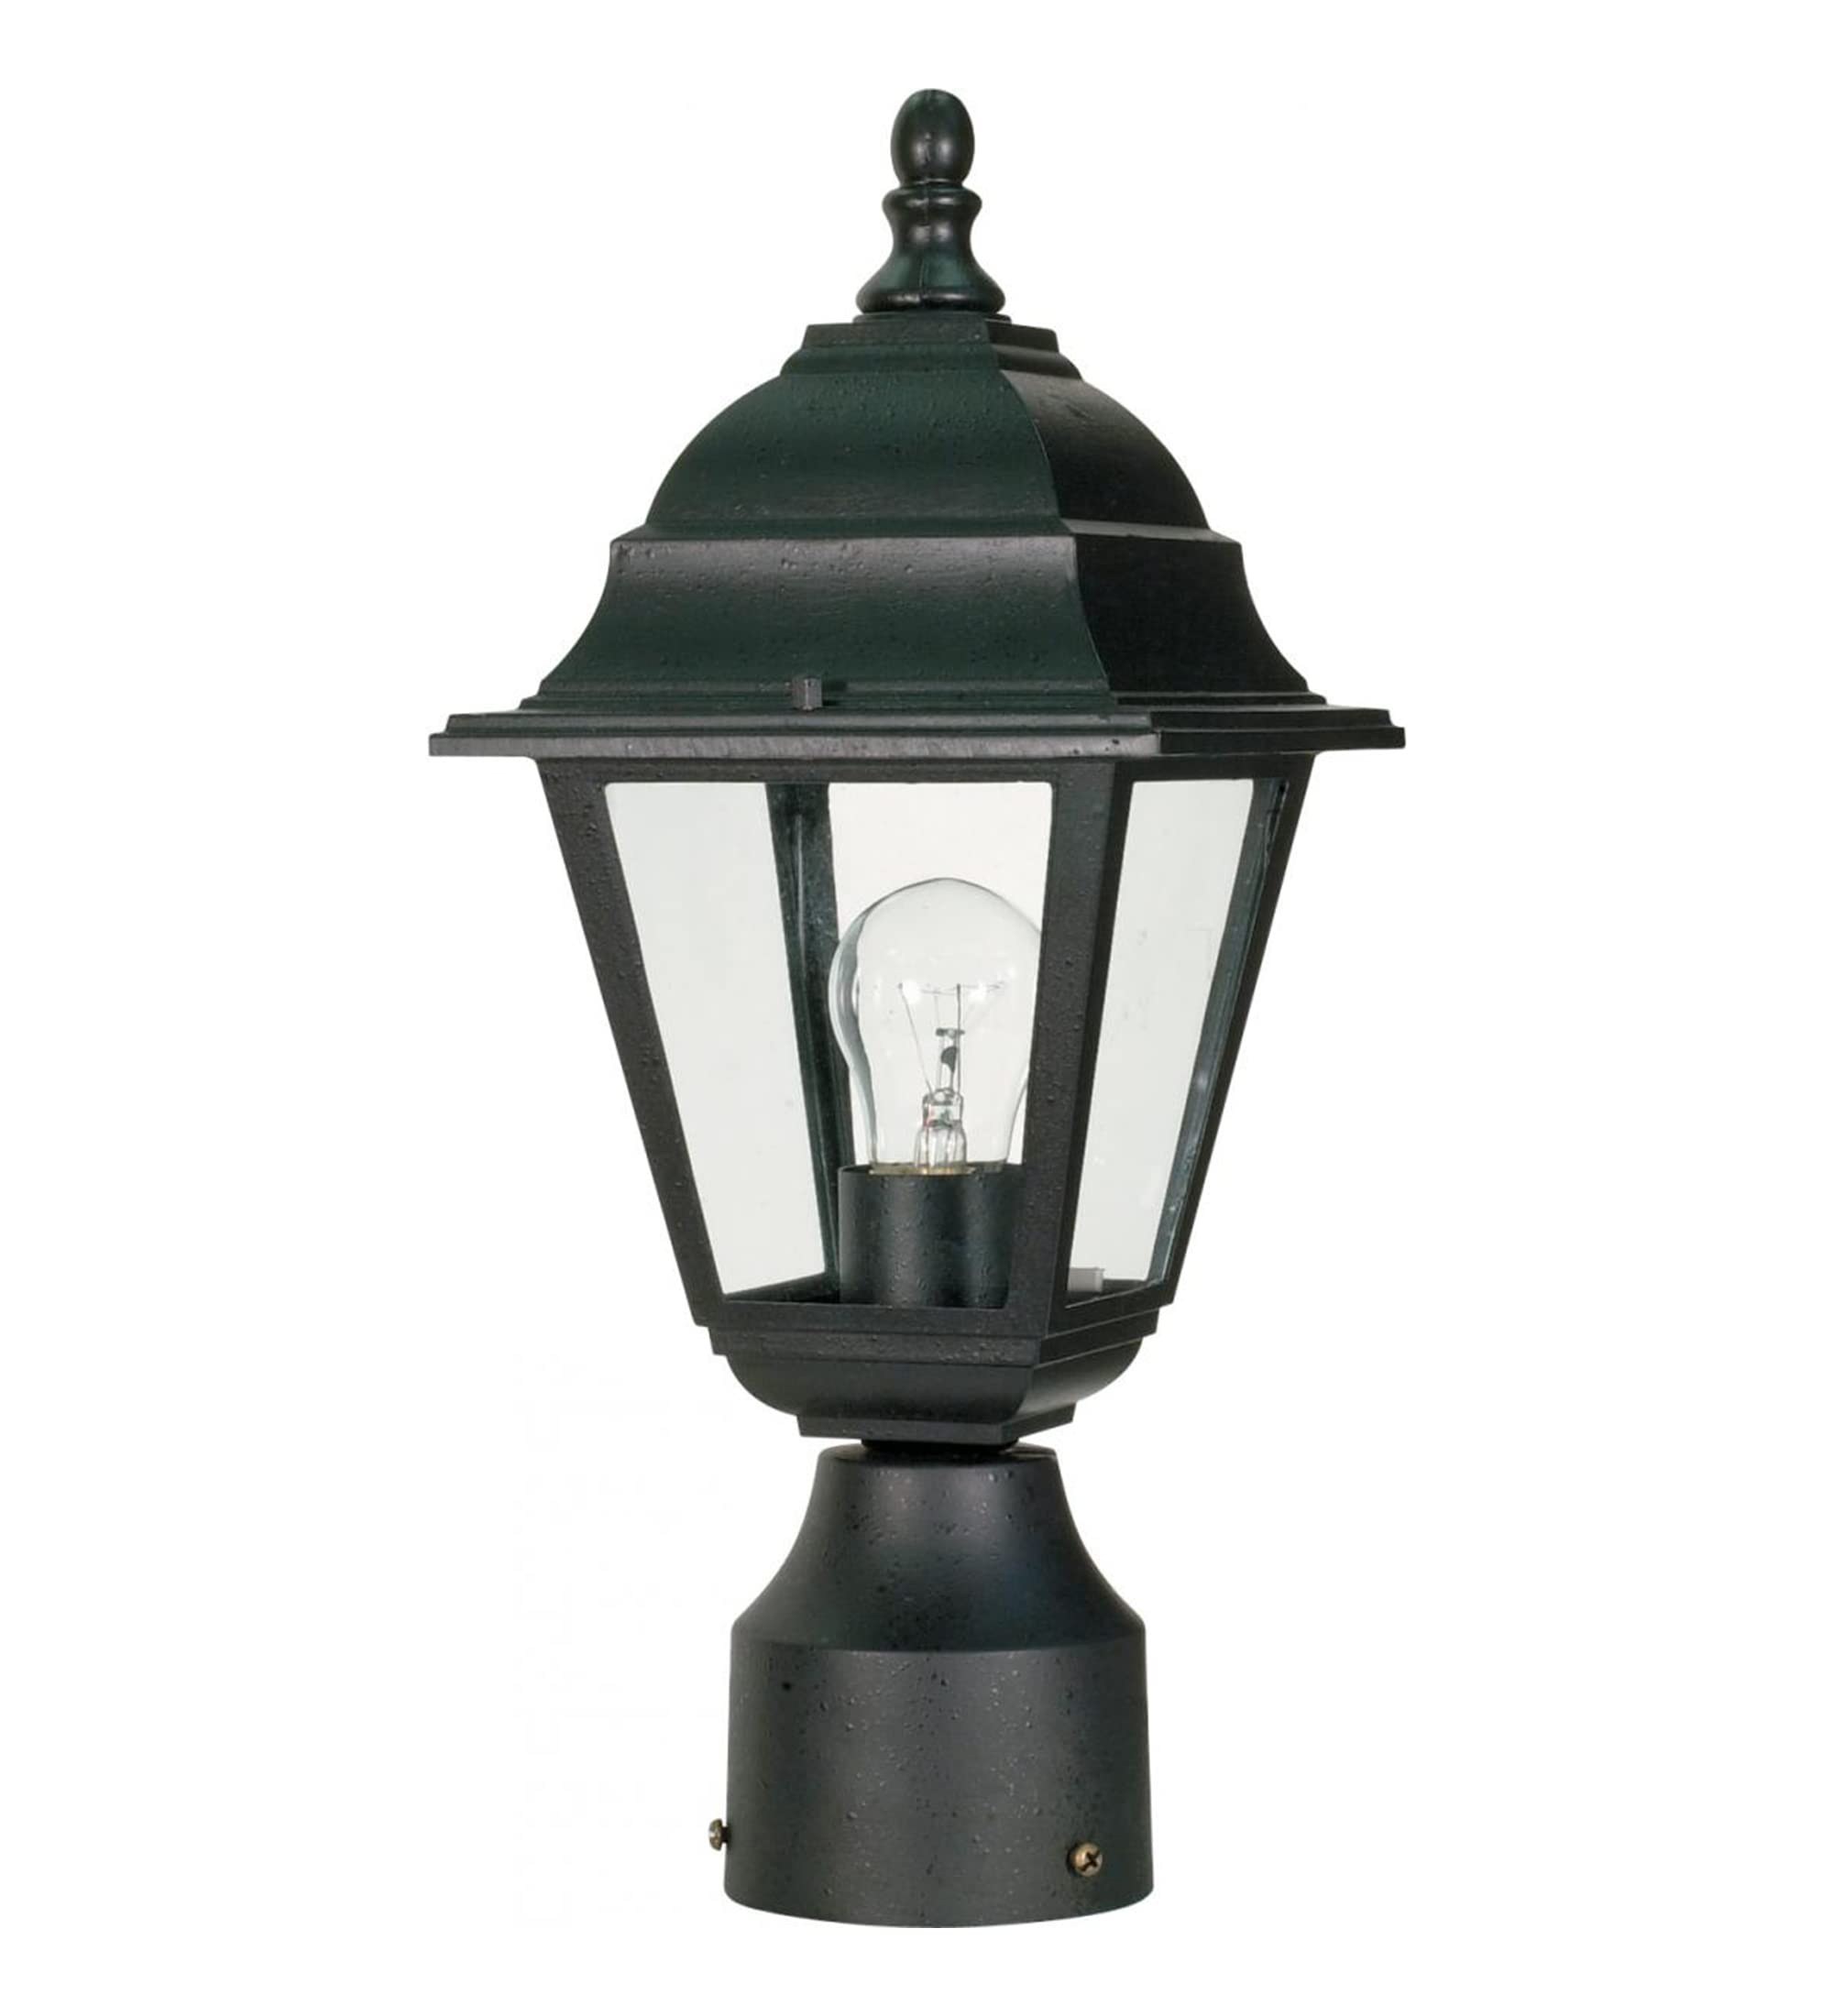 Ciata Lighting 1 Light Outdoor Aluminium Post Lantern with Clear Glass, Voltage: 120, wattage: 60, Single Post Mount Type.  - Acceptable